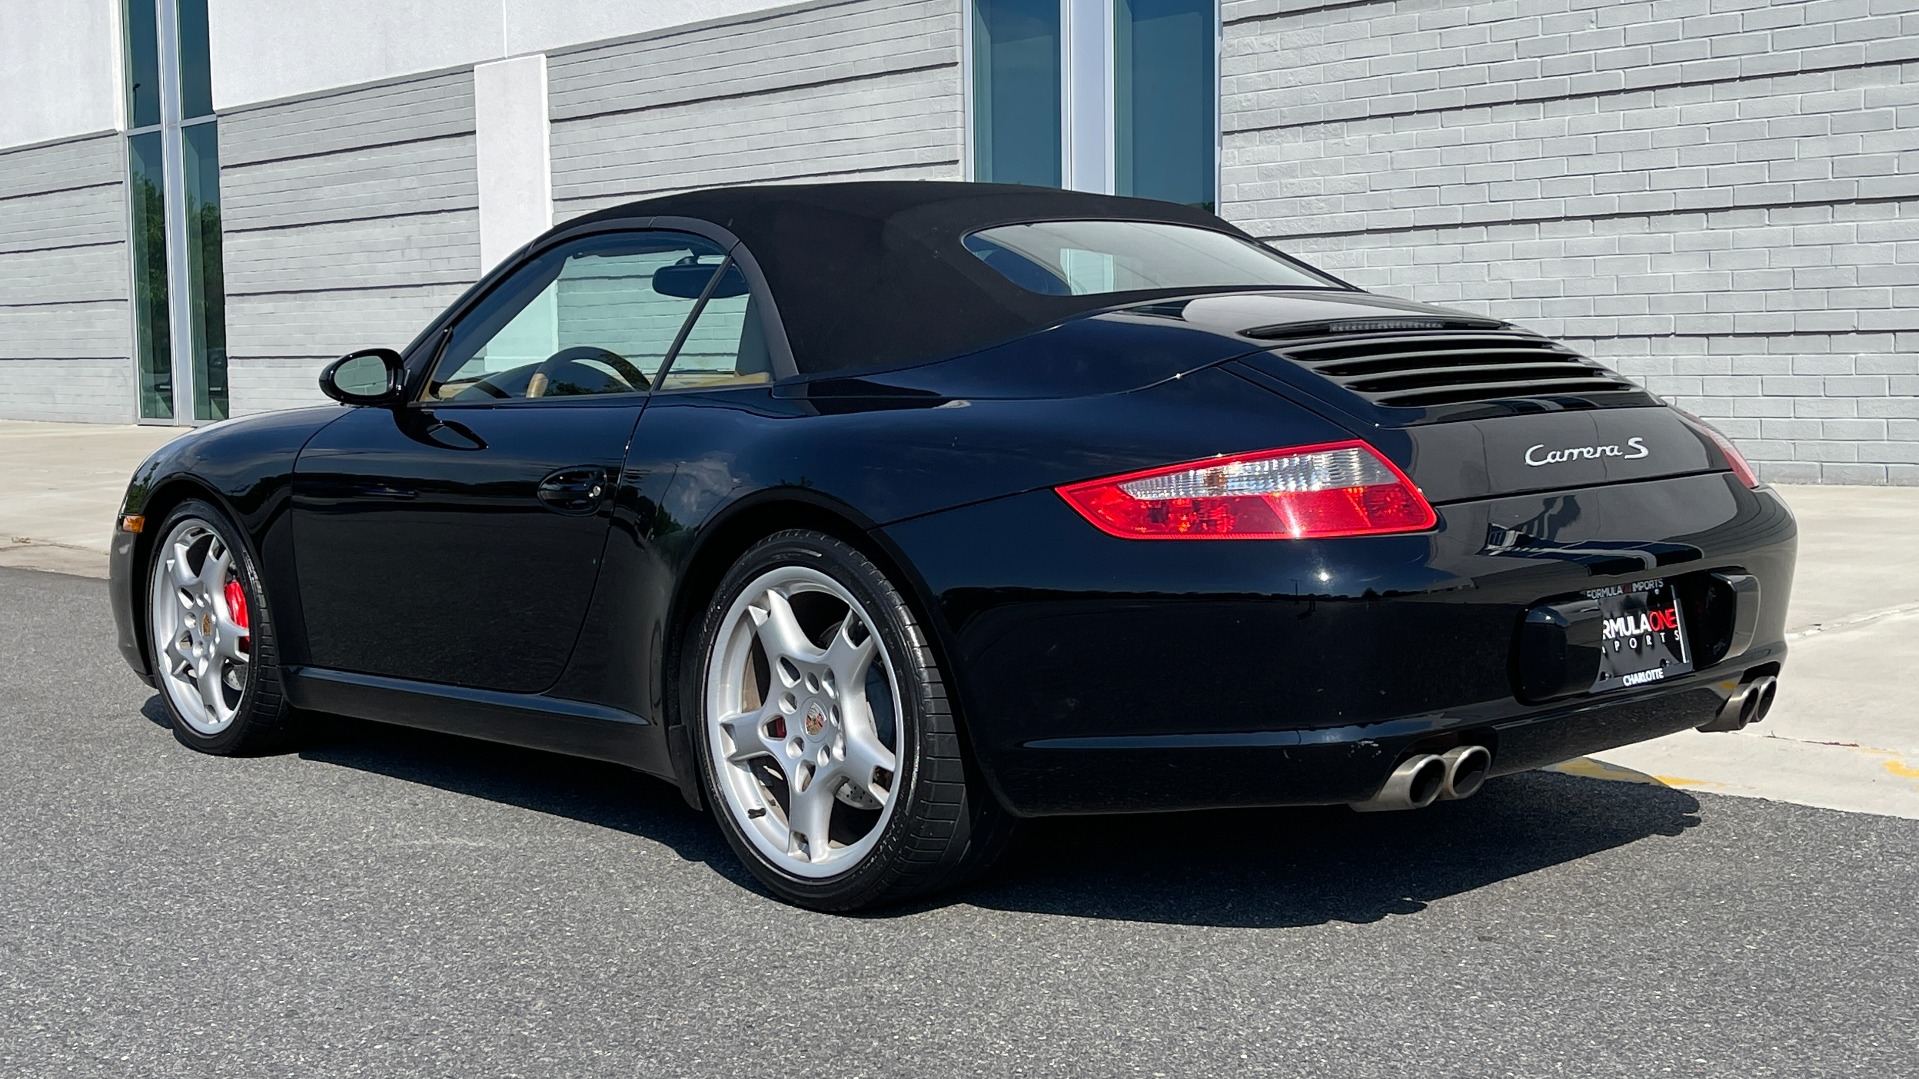 Used 2006 Porsche 911 CARRERA S CABRIOLET / BOSE / CD CHANGER / PWR SEAT PKG / HTD STS for sale $60,999 at Formula Imports in Charlotte NC 28227 14